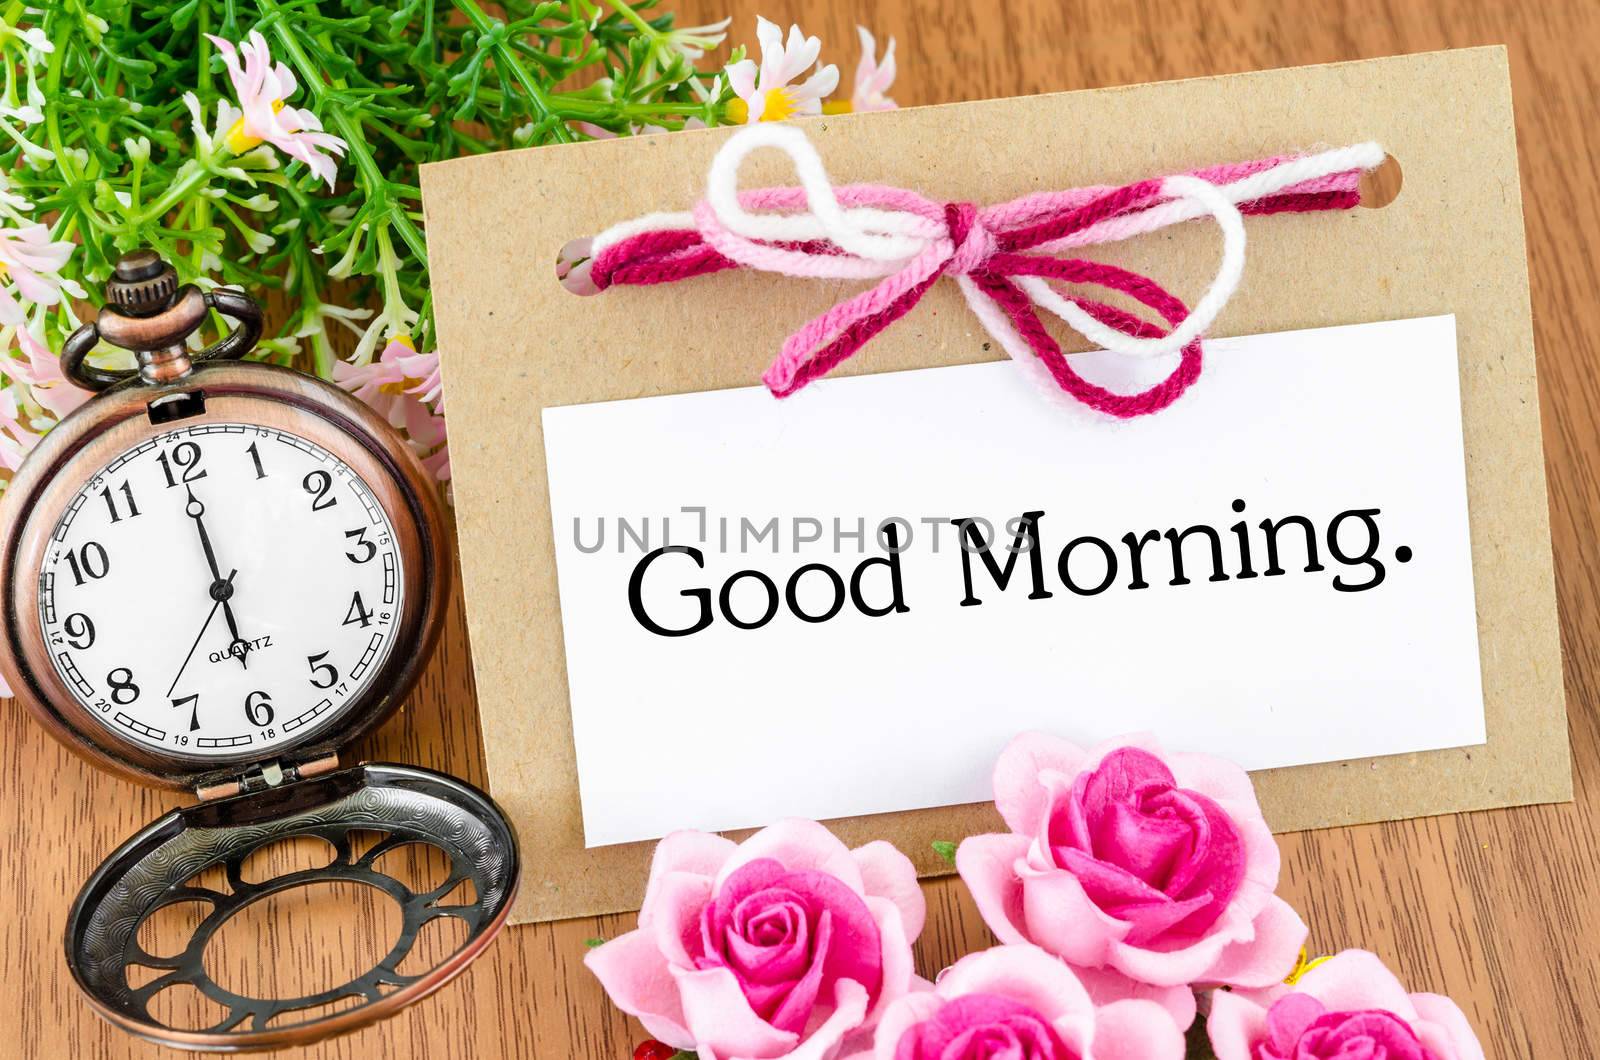 Good morning in greeting card and pocket watch on wooden background.